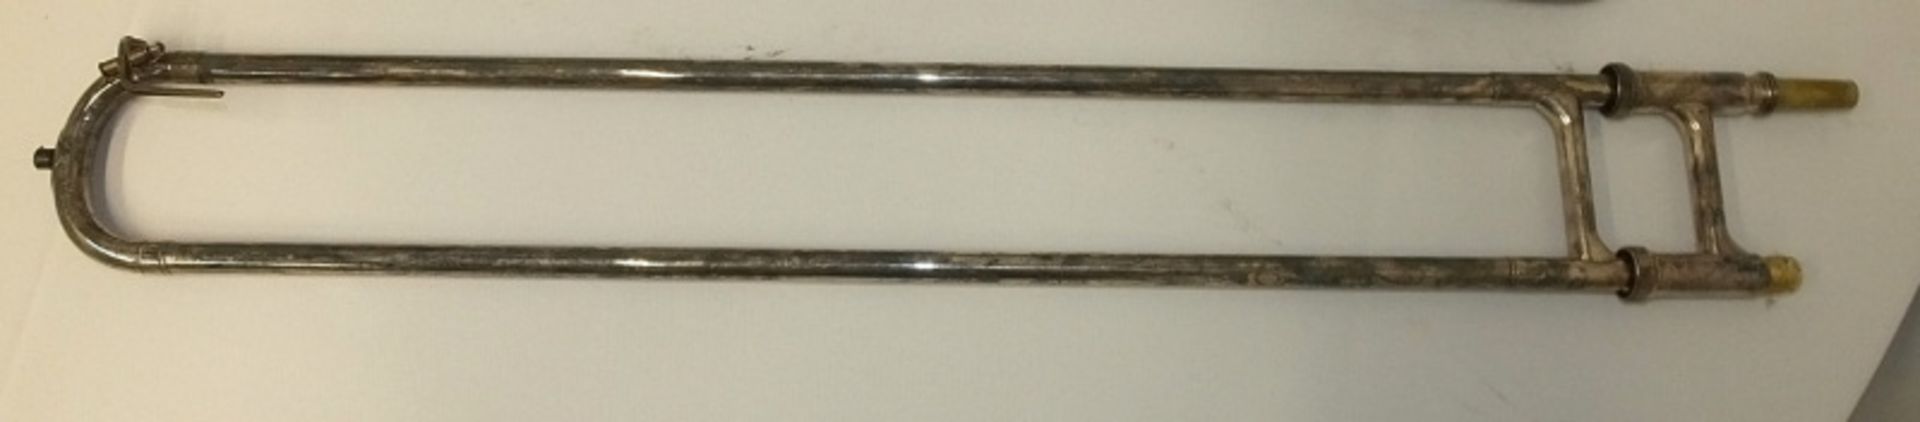 Boosey & Hawkes 636 Trombone in case - serial number 621249 - Please check photos carefully - Image 3 of 10